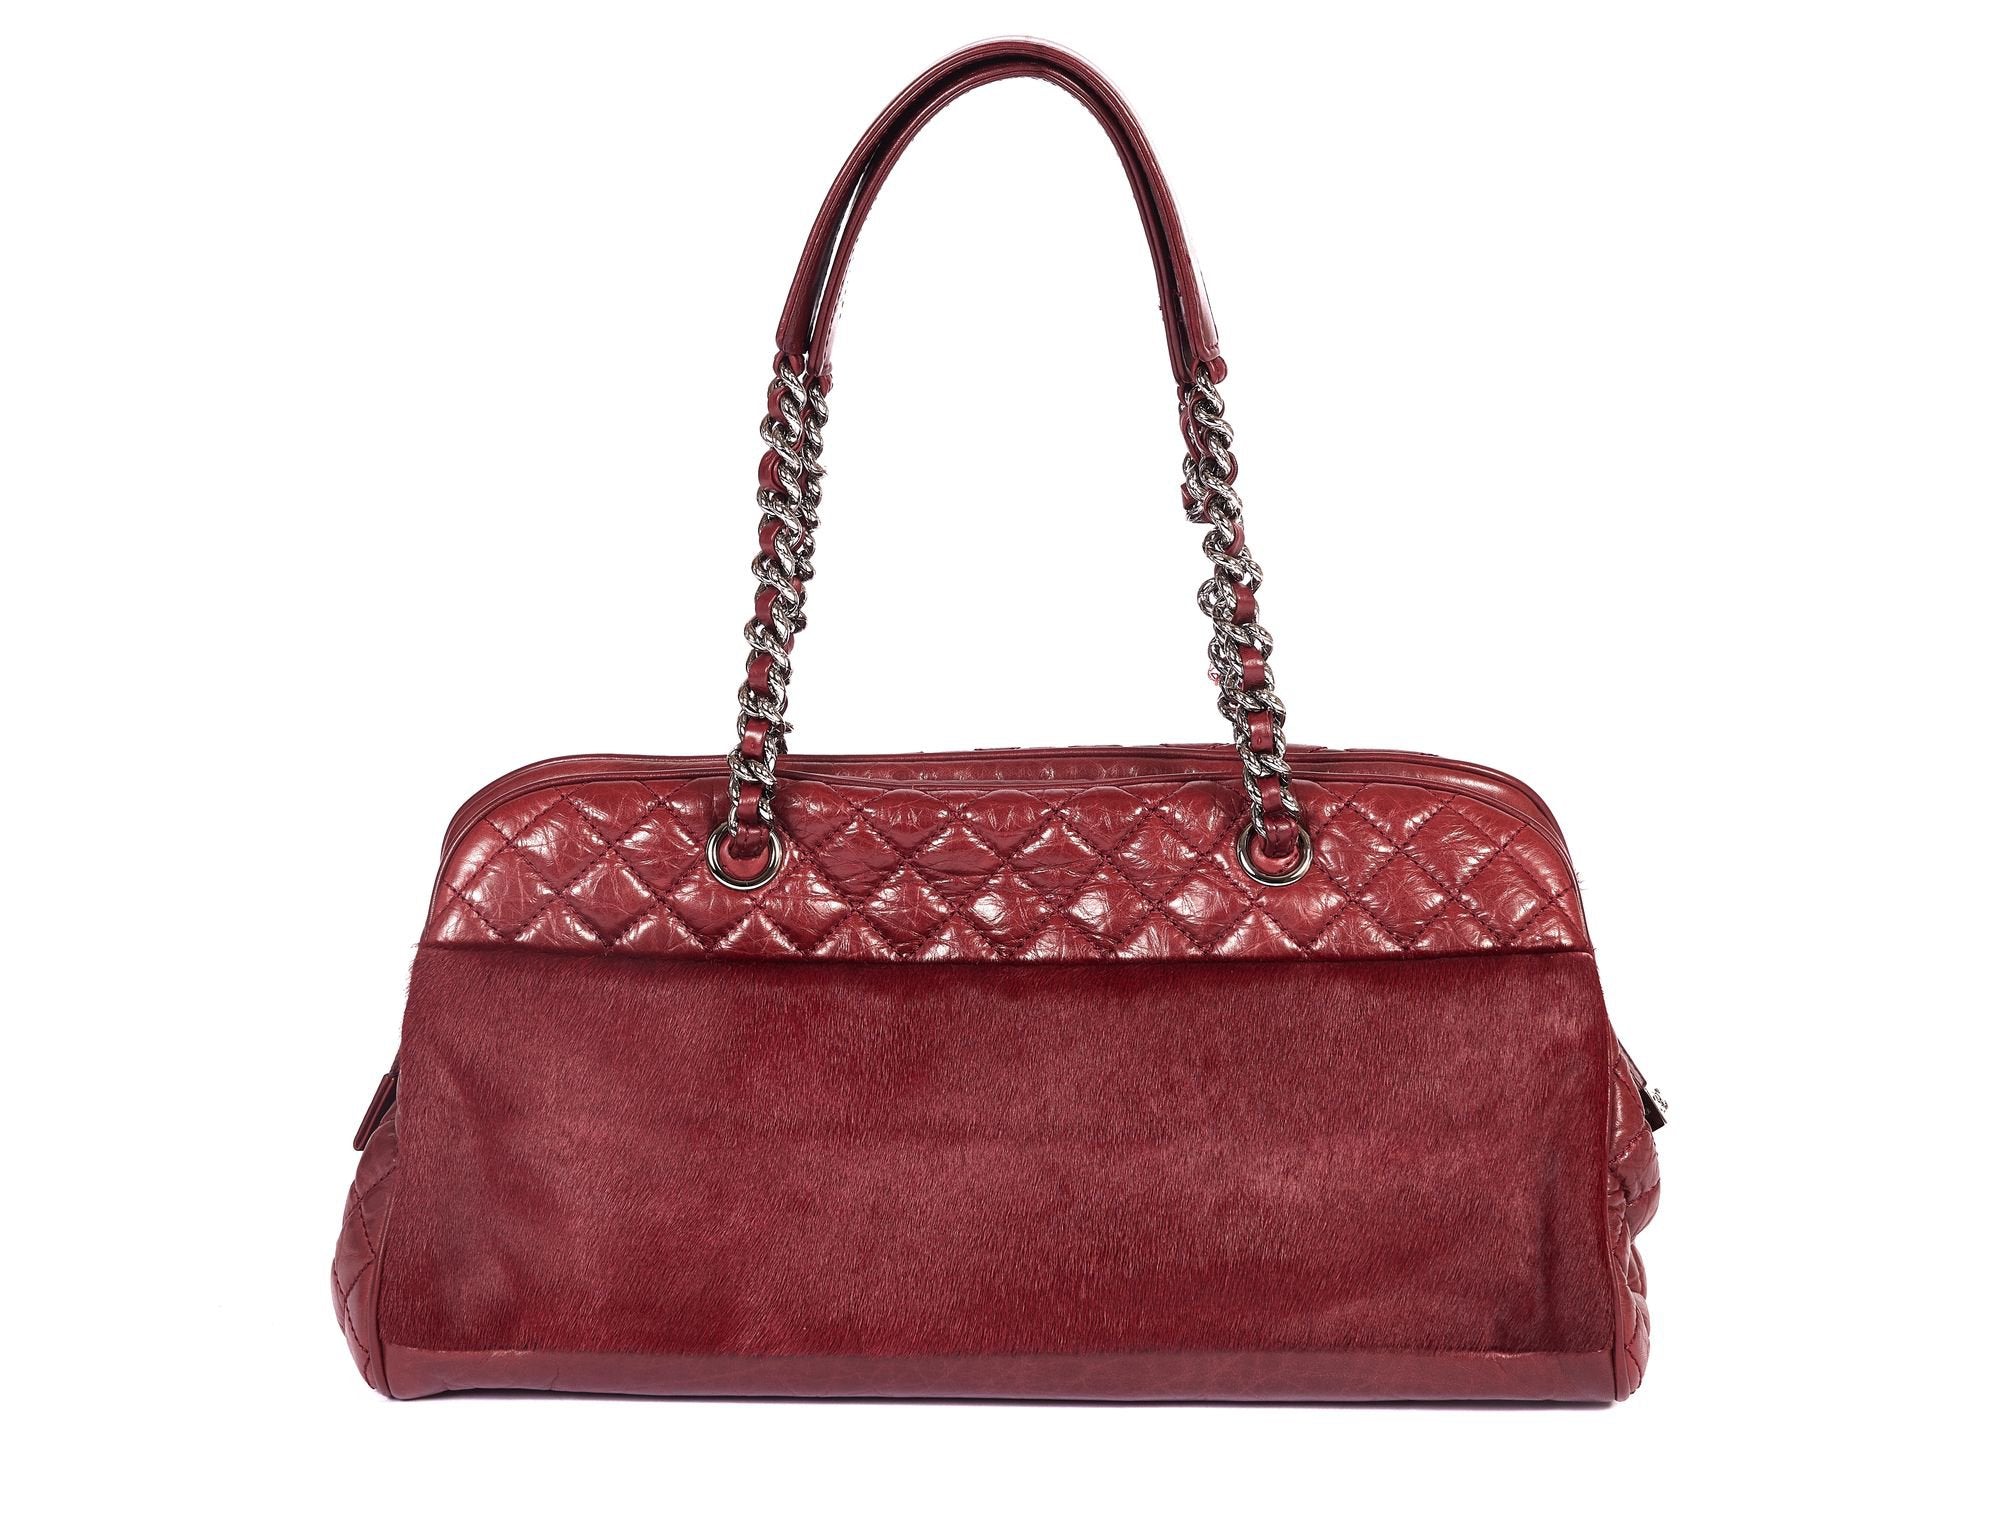 Chanel Burgundy Pony Hair Zipped Tote - Vintage Lux